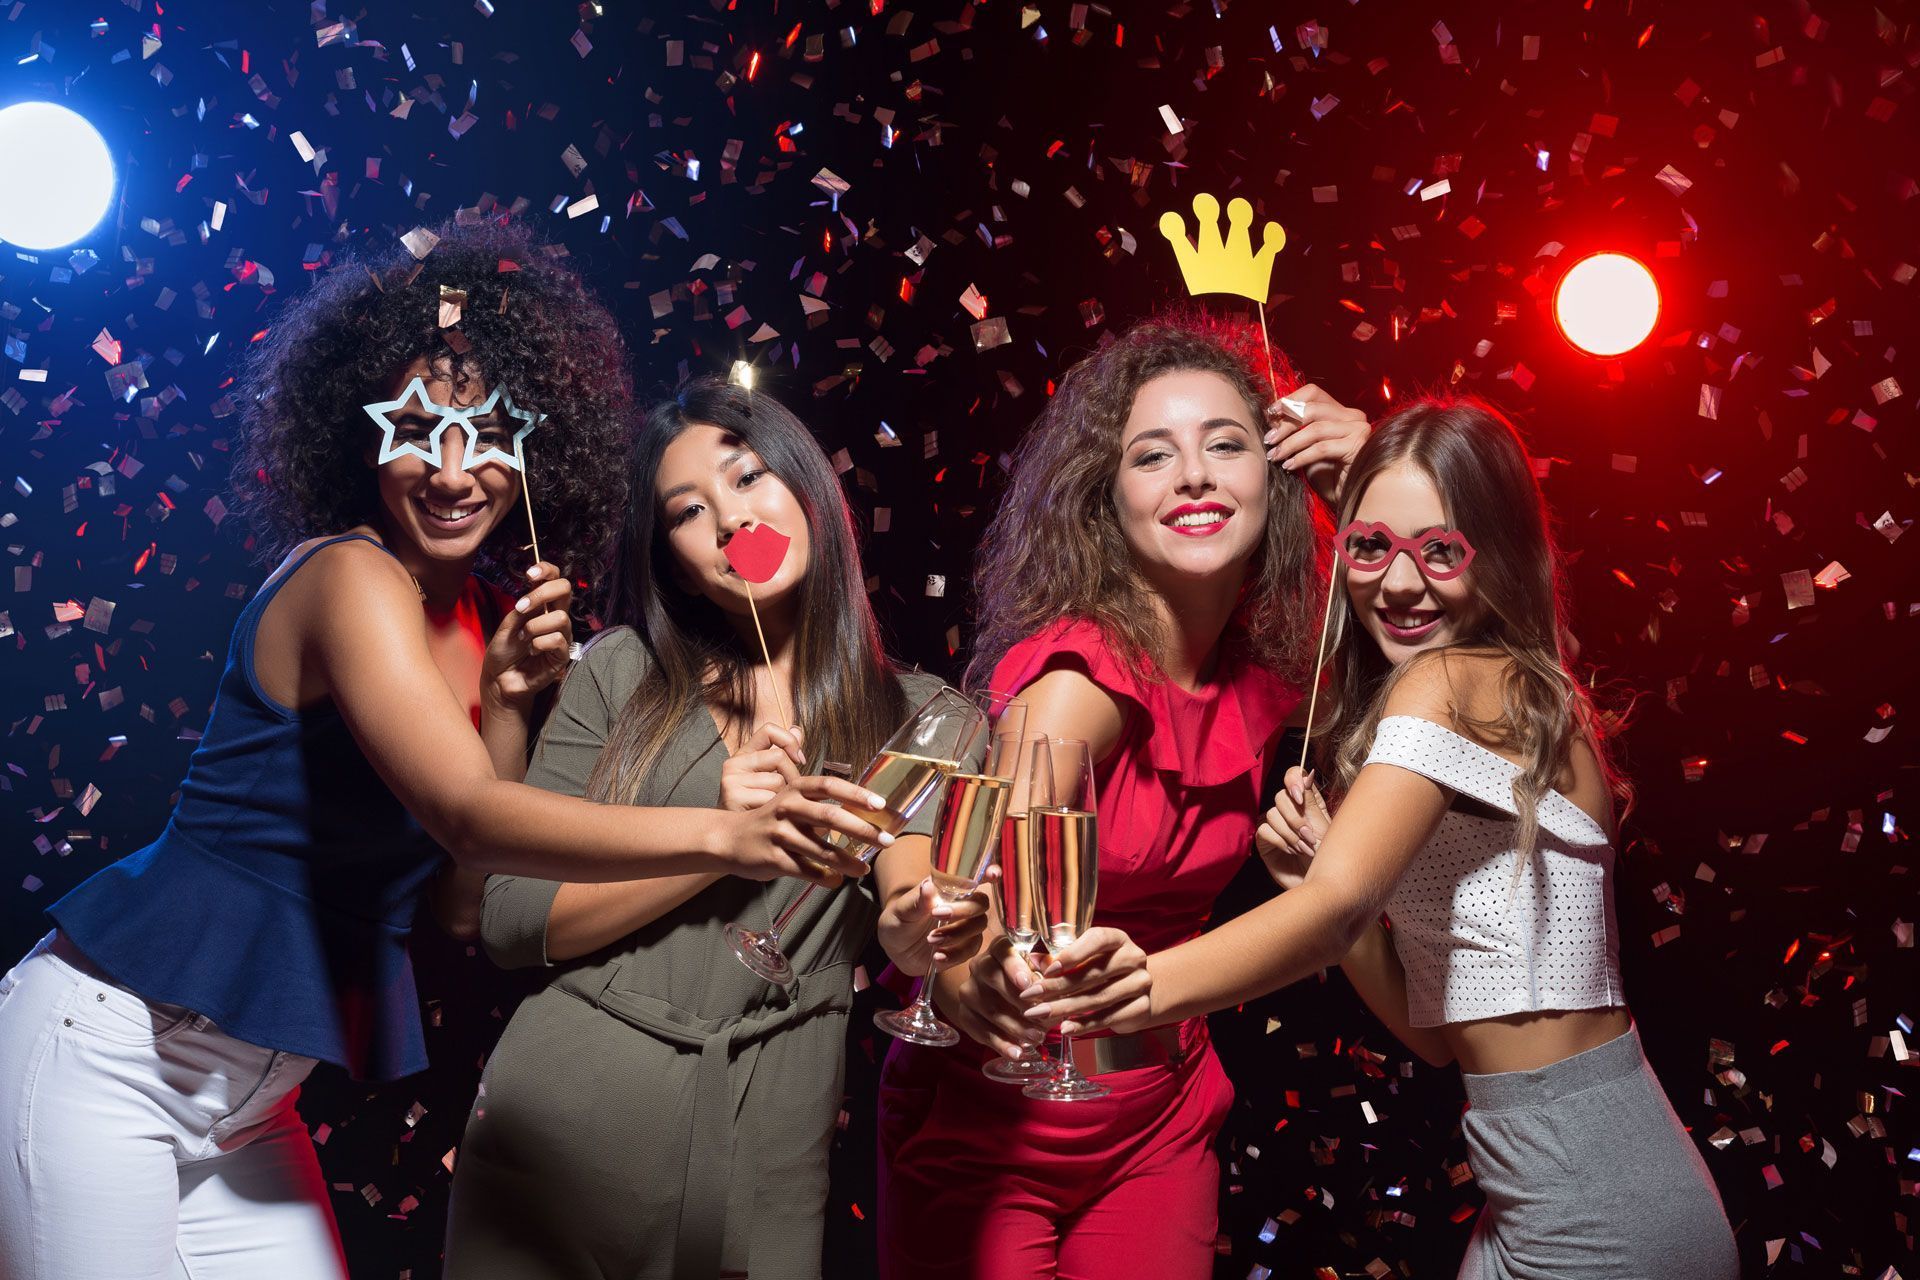 A group of women are holding champagne glasses at a party